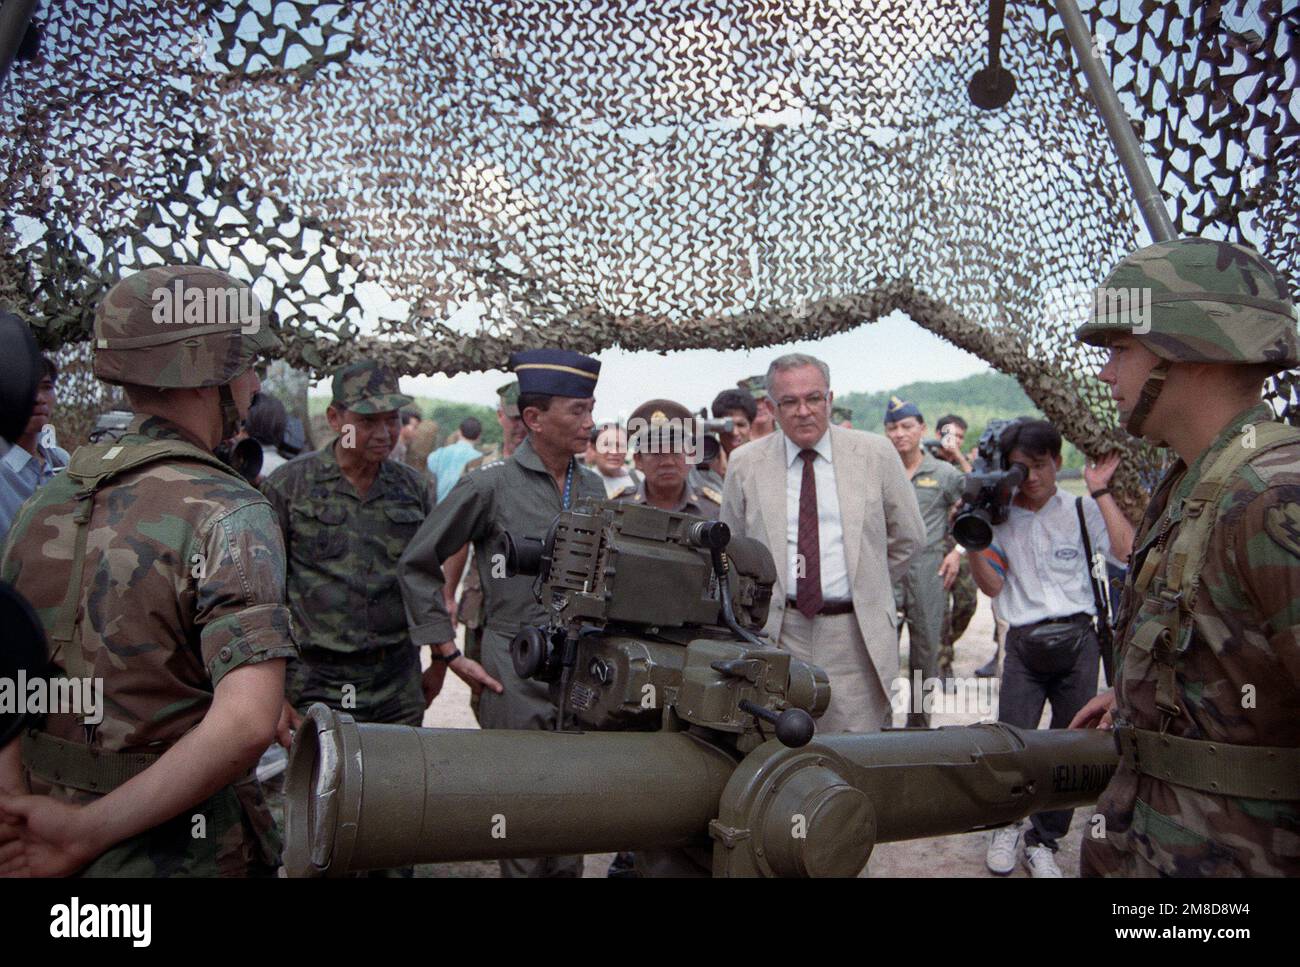 GEN Sundhara Kongsompong, left center, Supreme Commander, Royal Thai Armed Forces, and U.S. Ambassador to Thailand Daniel A. O'Donohue, center right, view a TOW tube-launched, optically tracked, wire-guided heavy anti-tank weapon at a static display manned by members of 4th Bn., 22nd Inf., 25th Inf. Div. (Light), following the opening ceremonies for the combined Thai/U.S. exercise Cobra Gold '90. Subject Operation/Series: COBRA GOLD '90 Base: Chon Buri Country: Thailand (THA) Stock Photo